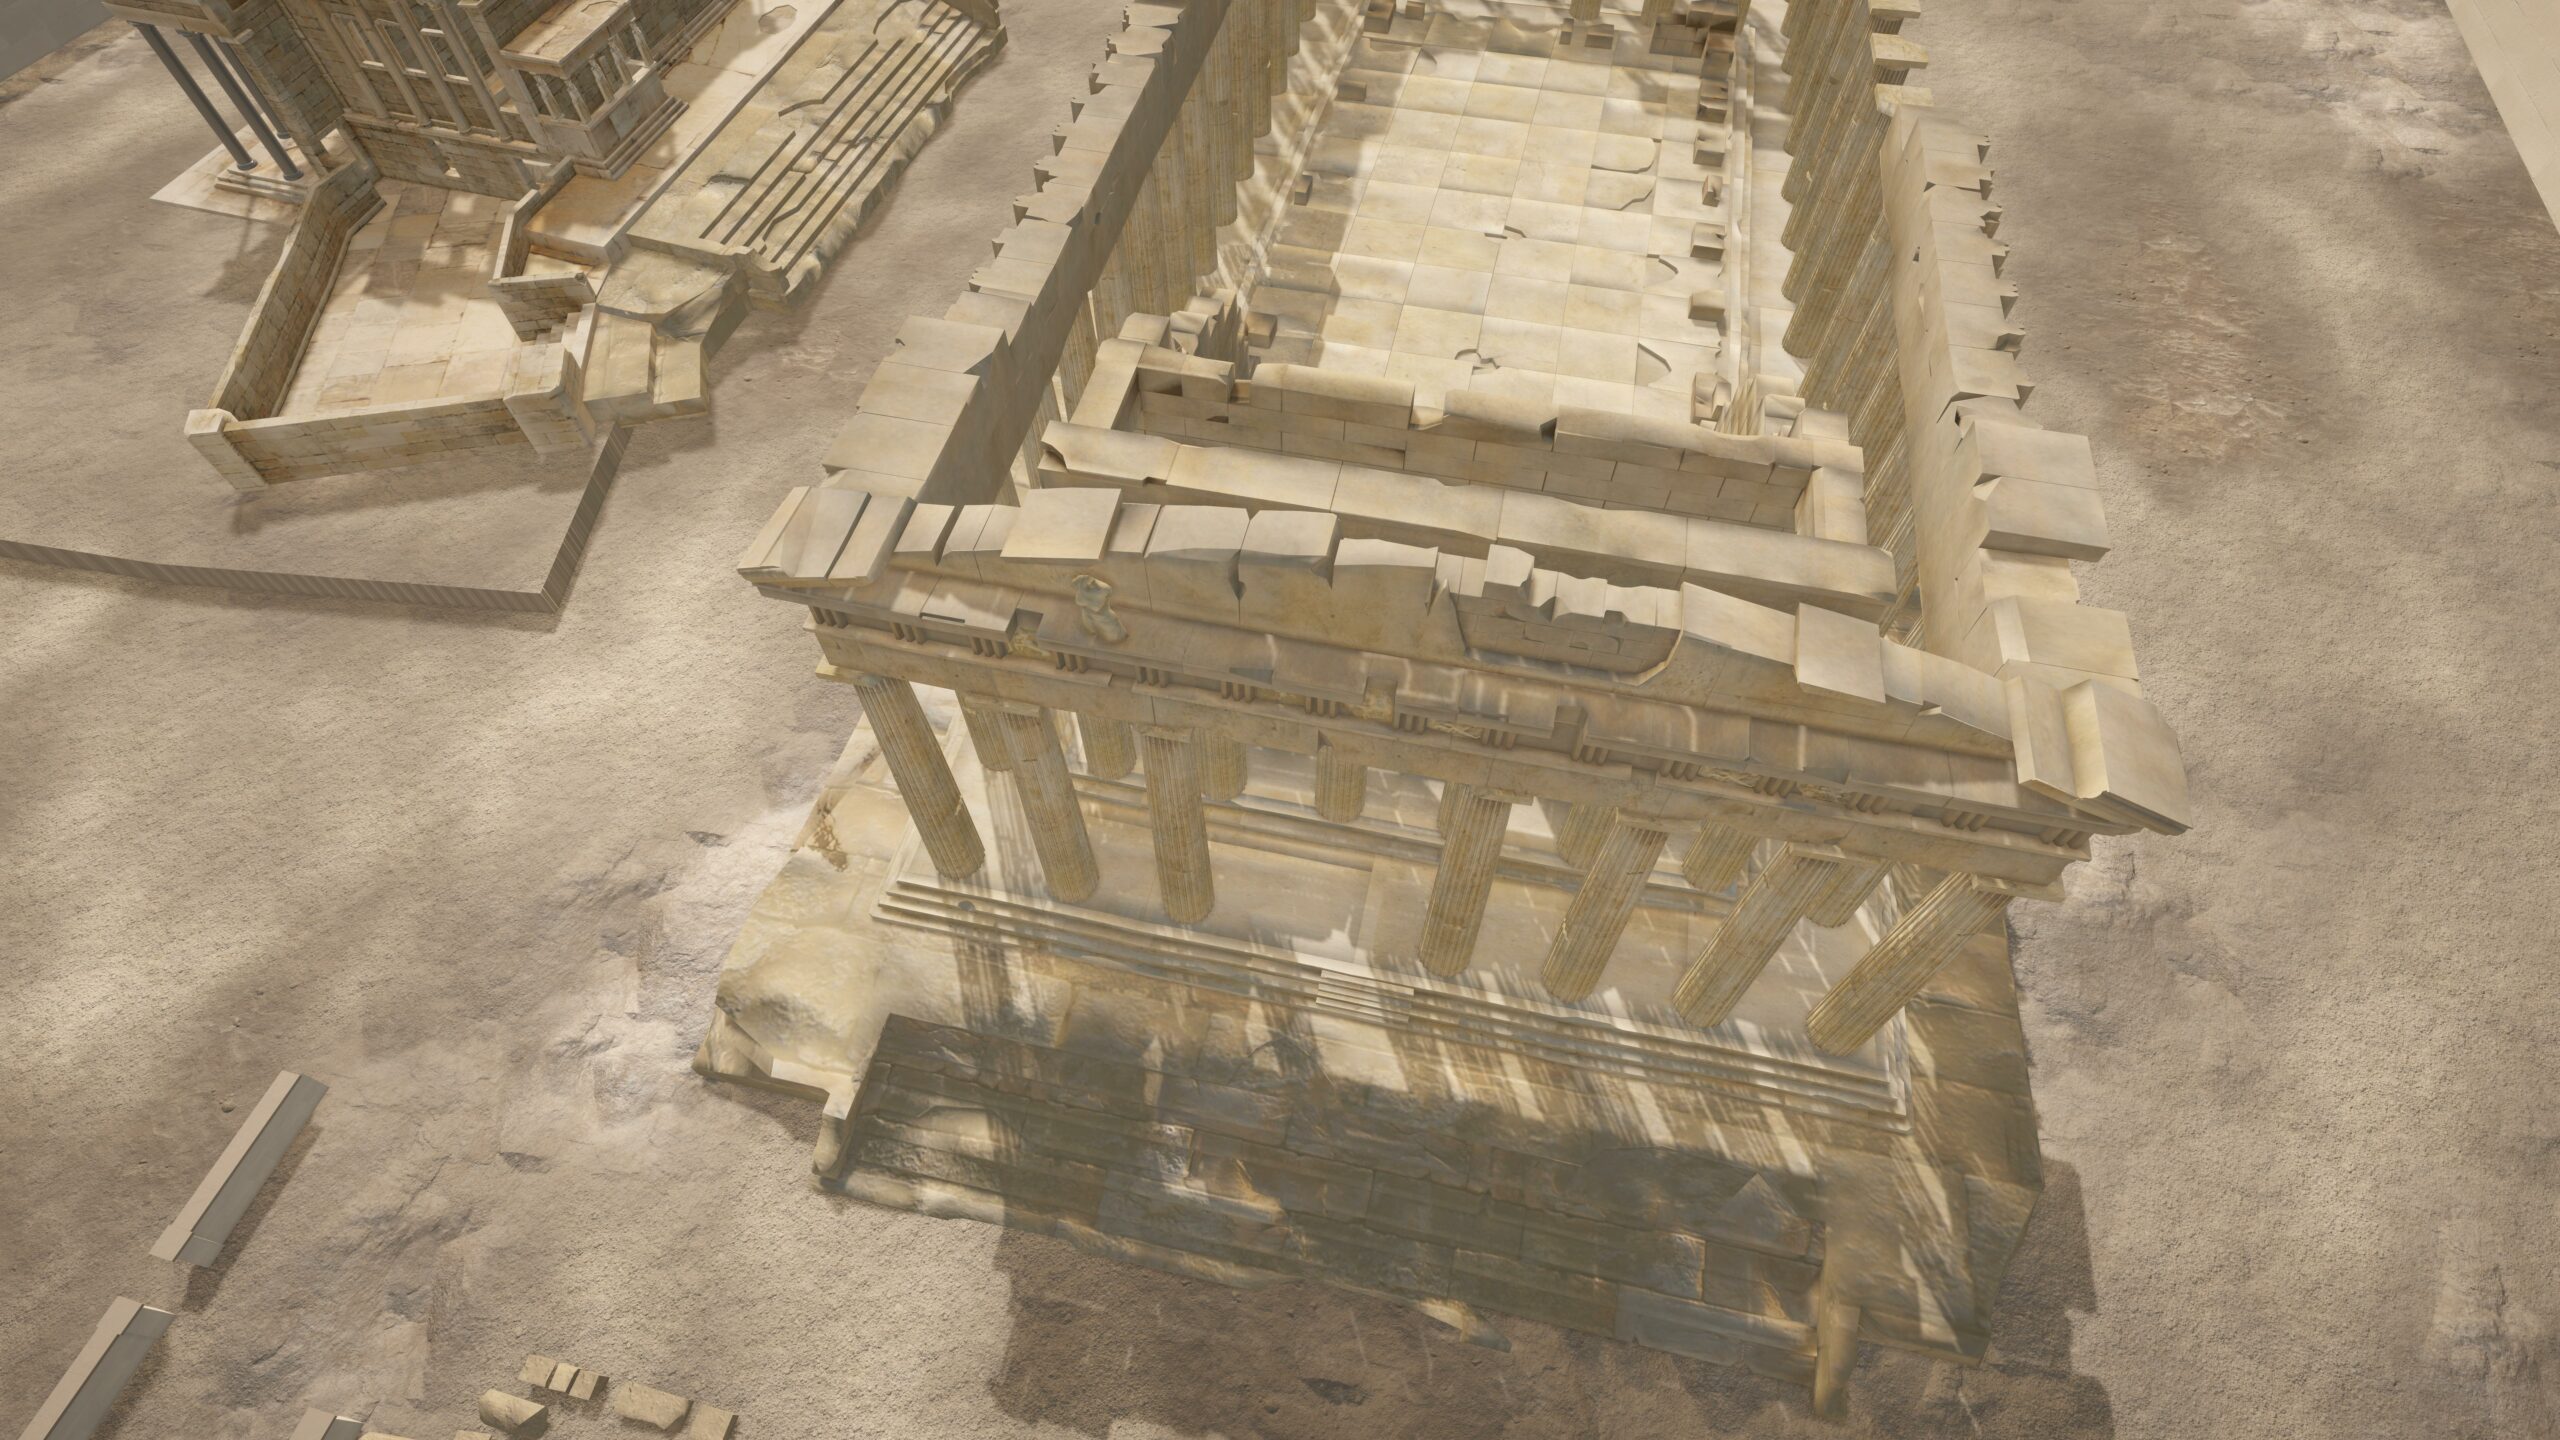 Parthenon in 5th Century top view